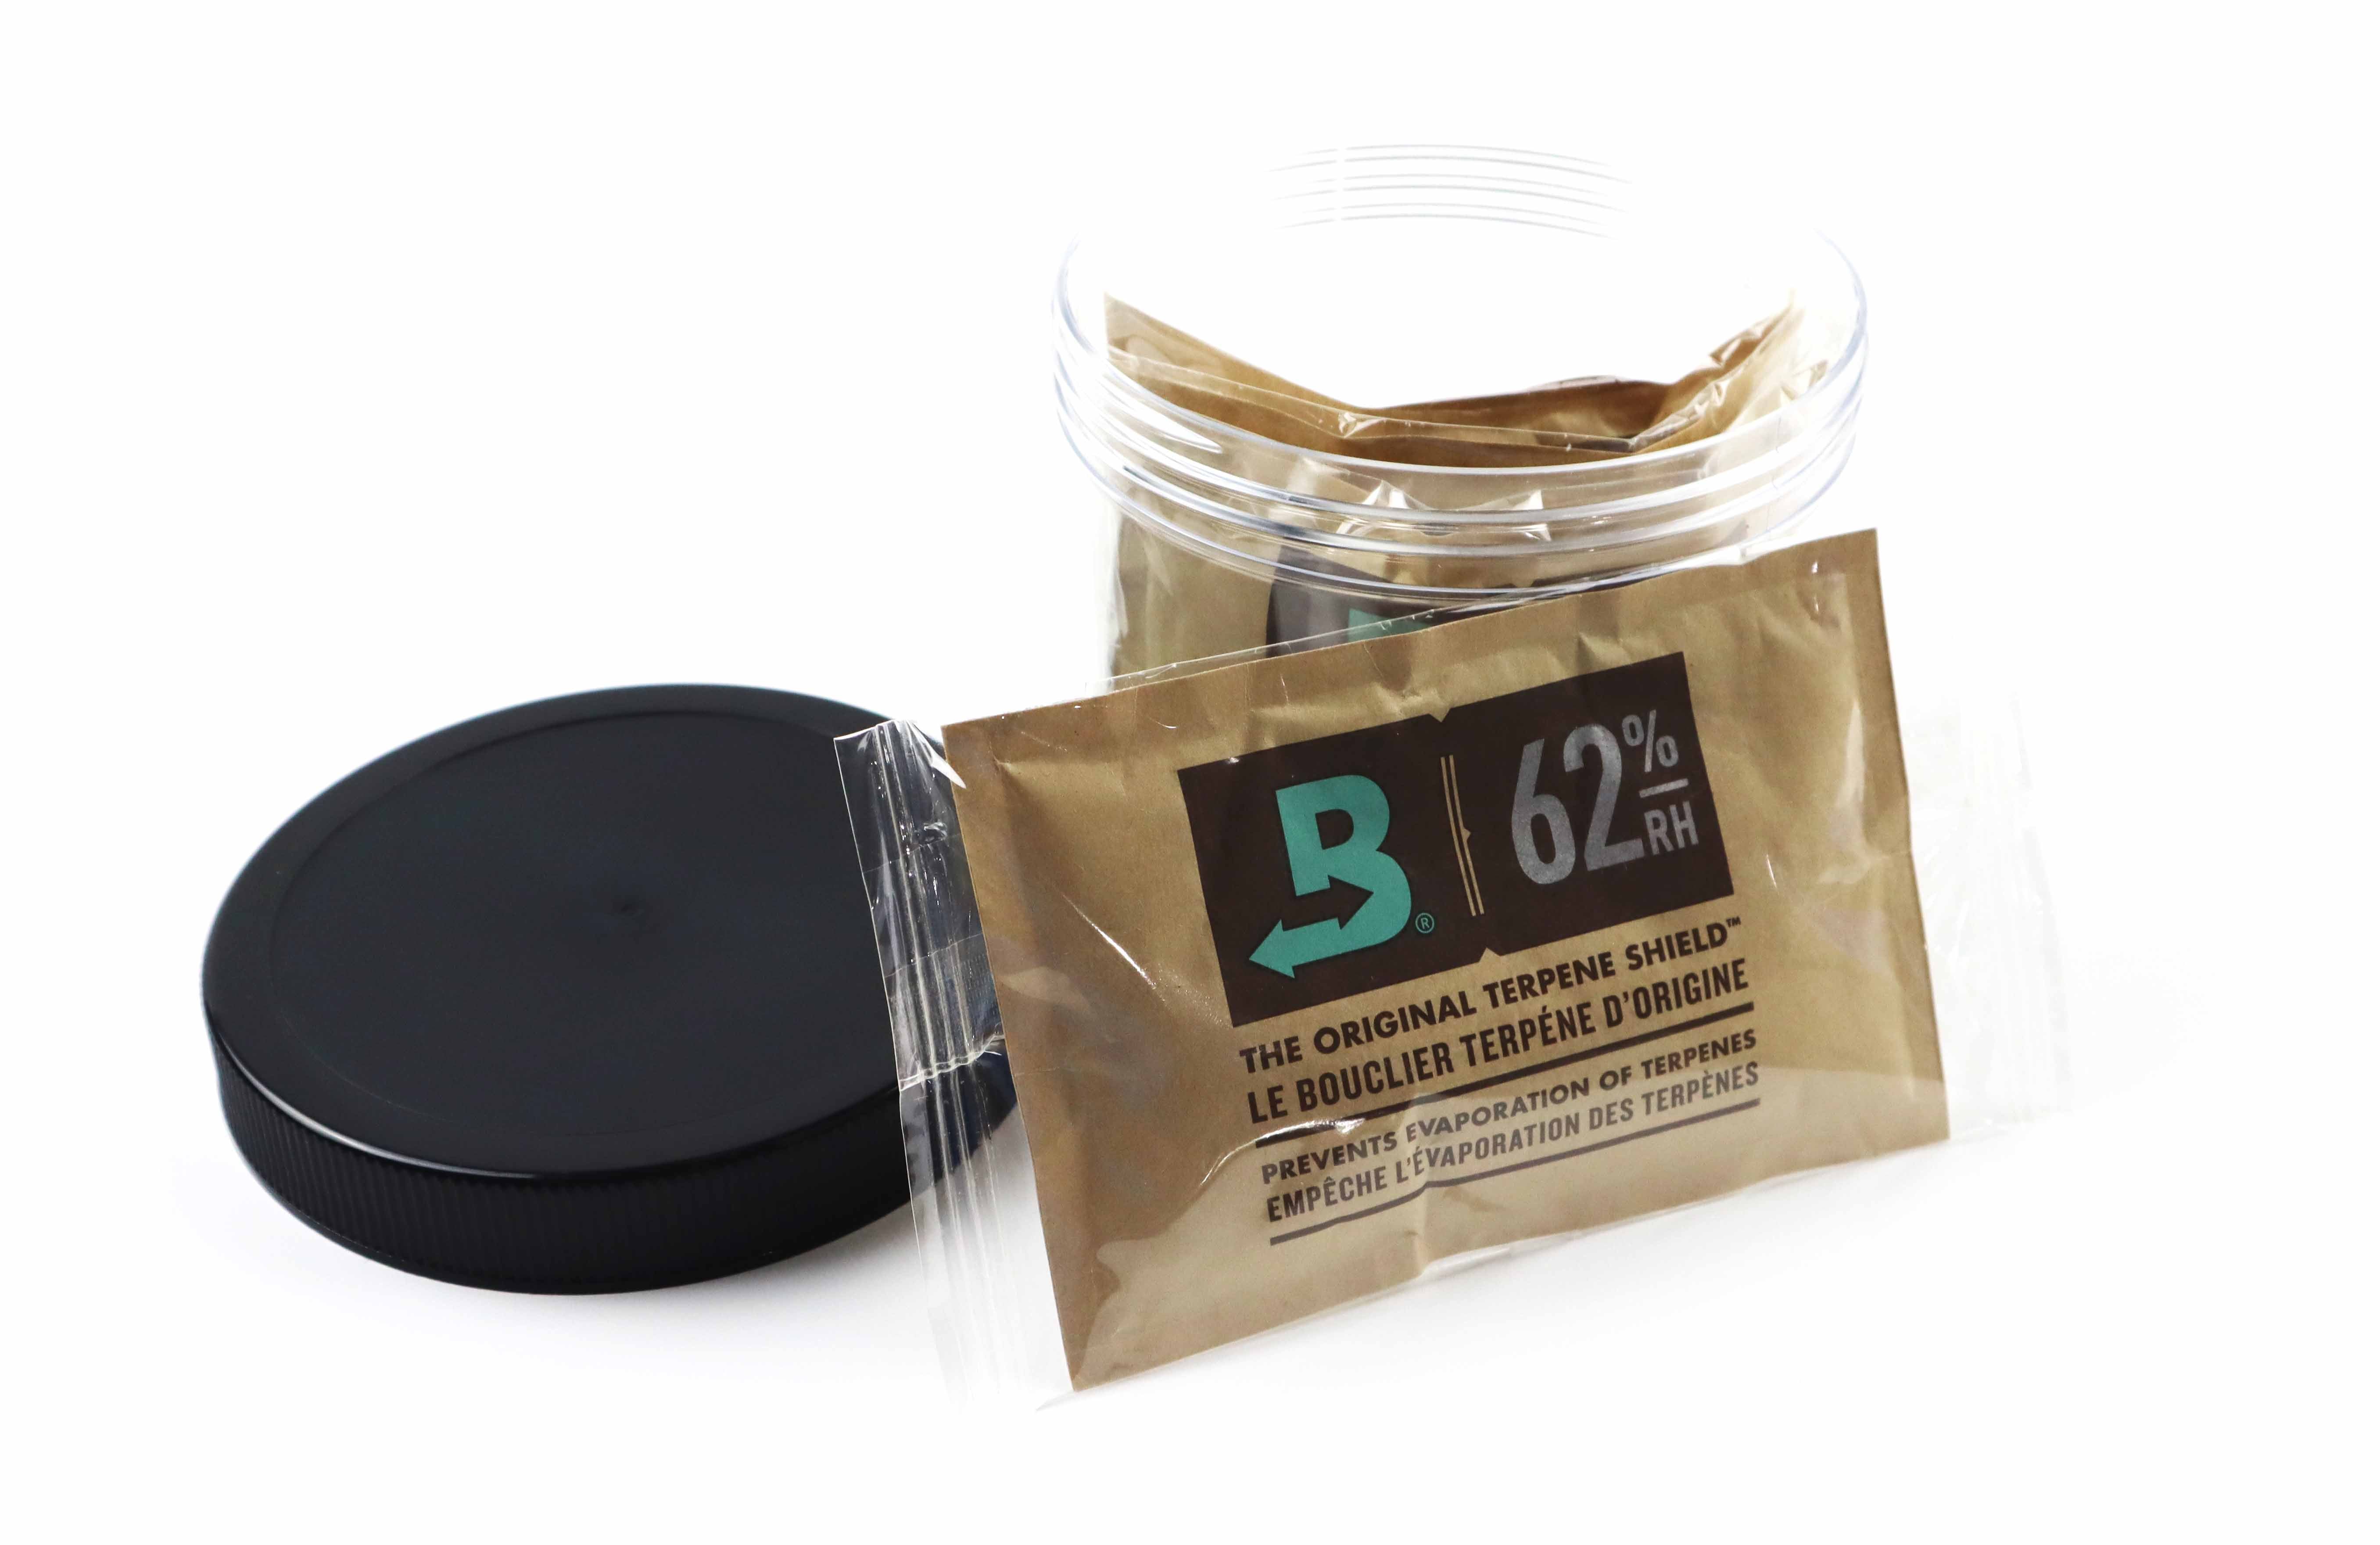 Set of 12 Boveda Humidity Control Packs (Size 4, 62%)